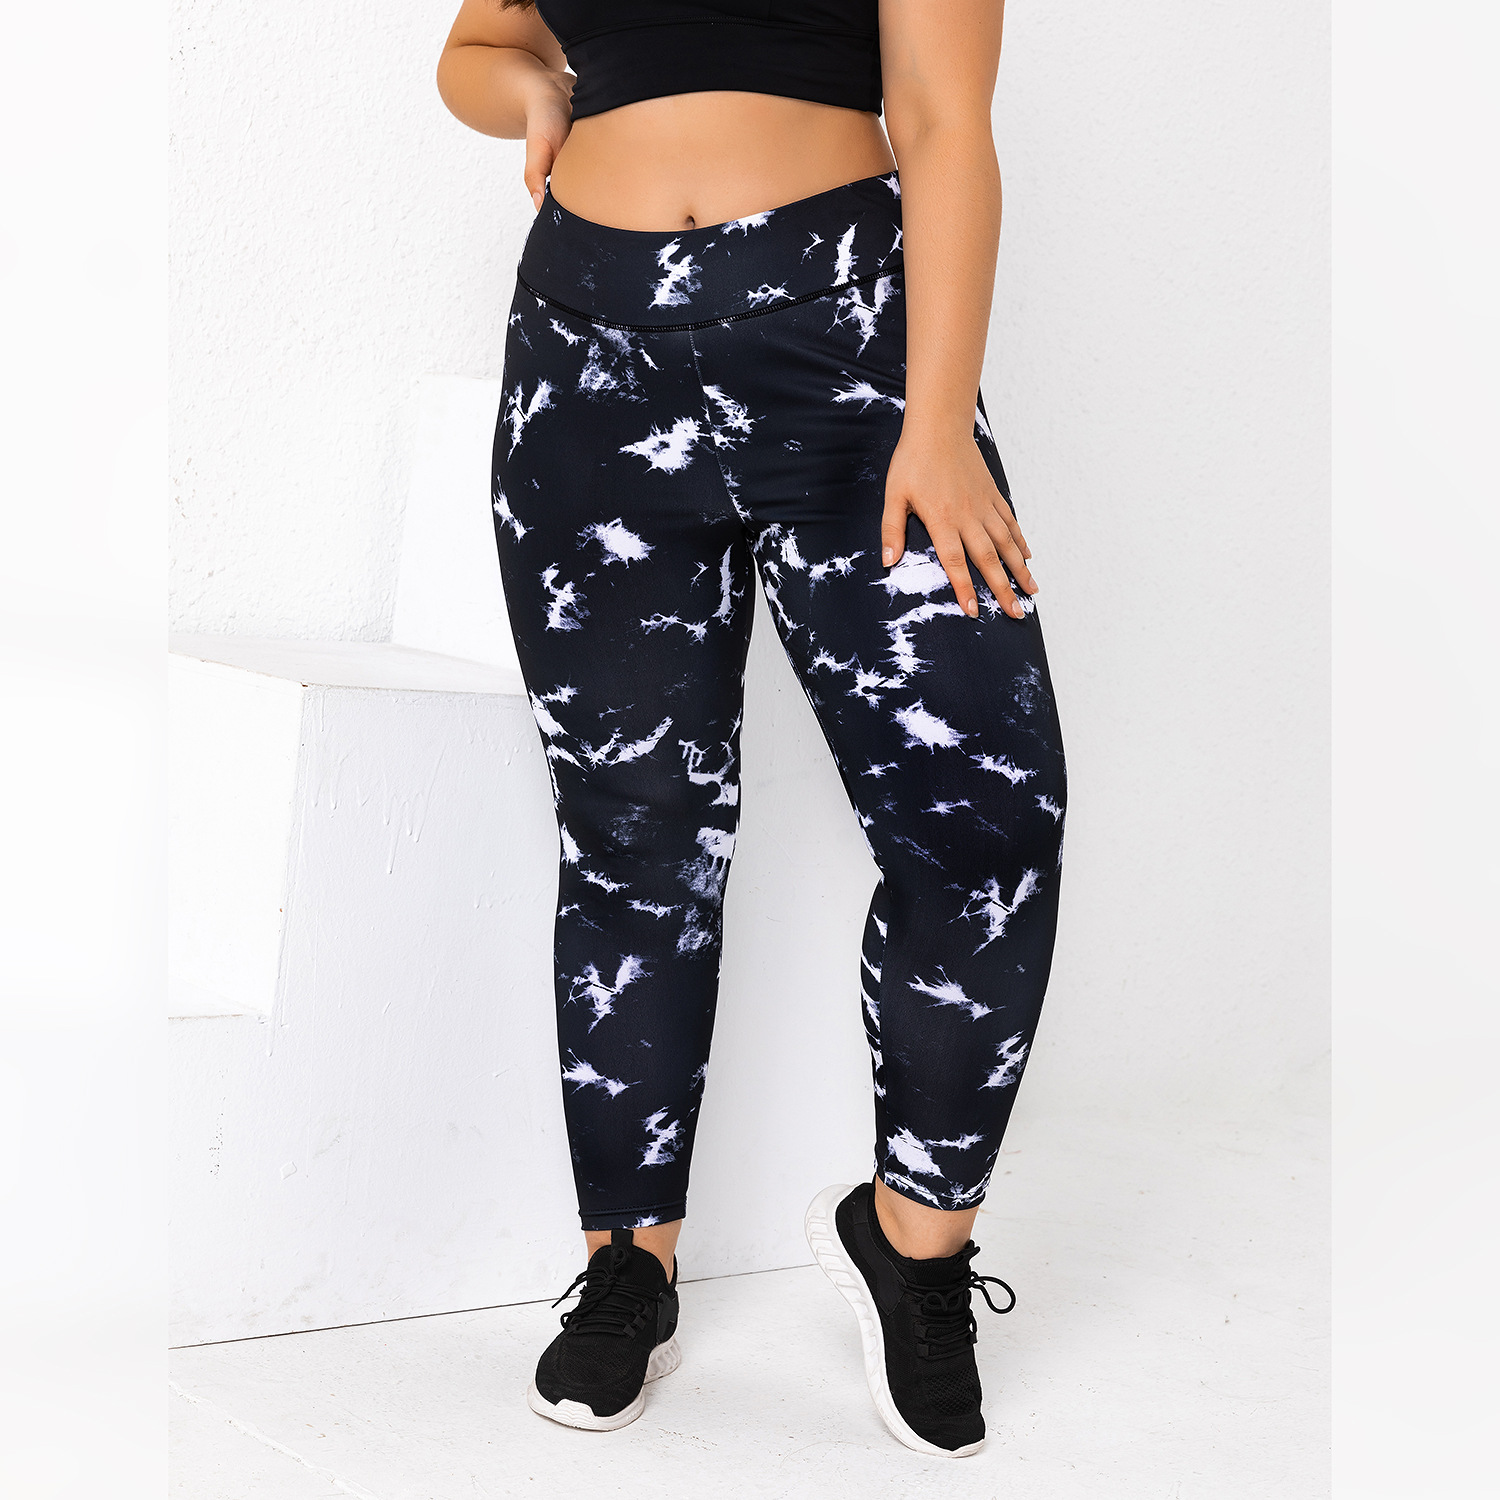 Plus size yoga pants for women with elastic buttocks and printed leggings for slimming and fattening. Plus size high waisted women's pants